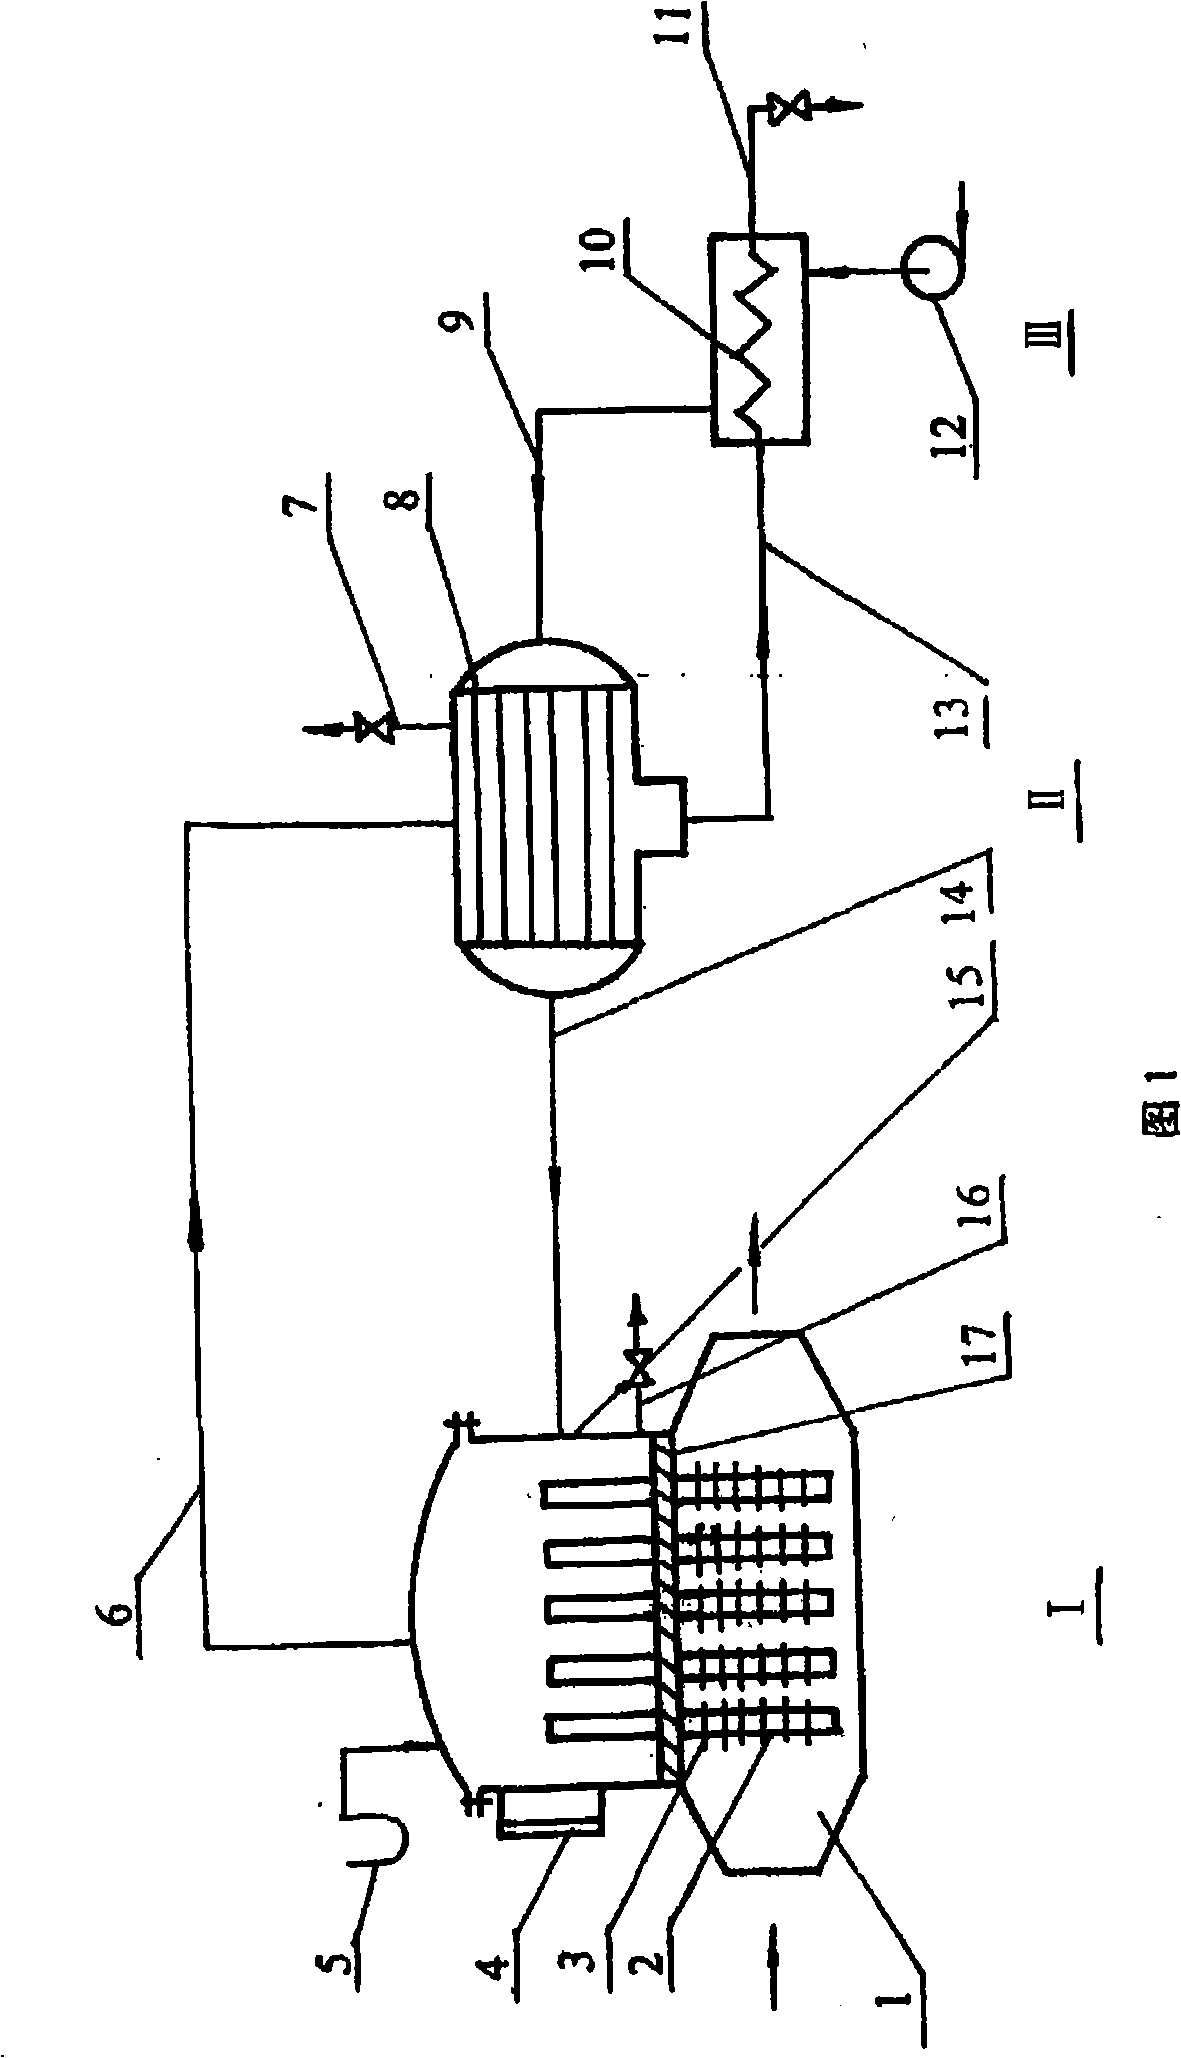 Desalination plant using residual heat of thermal superconductivity of heat pipe and engine high-temperature exhaust air